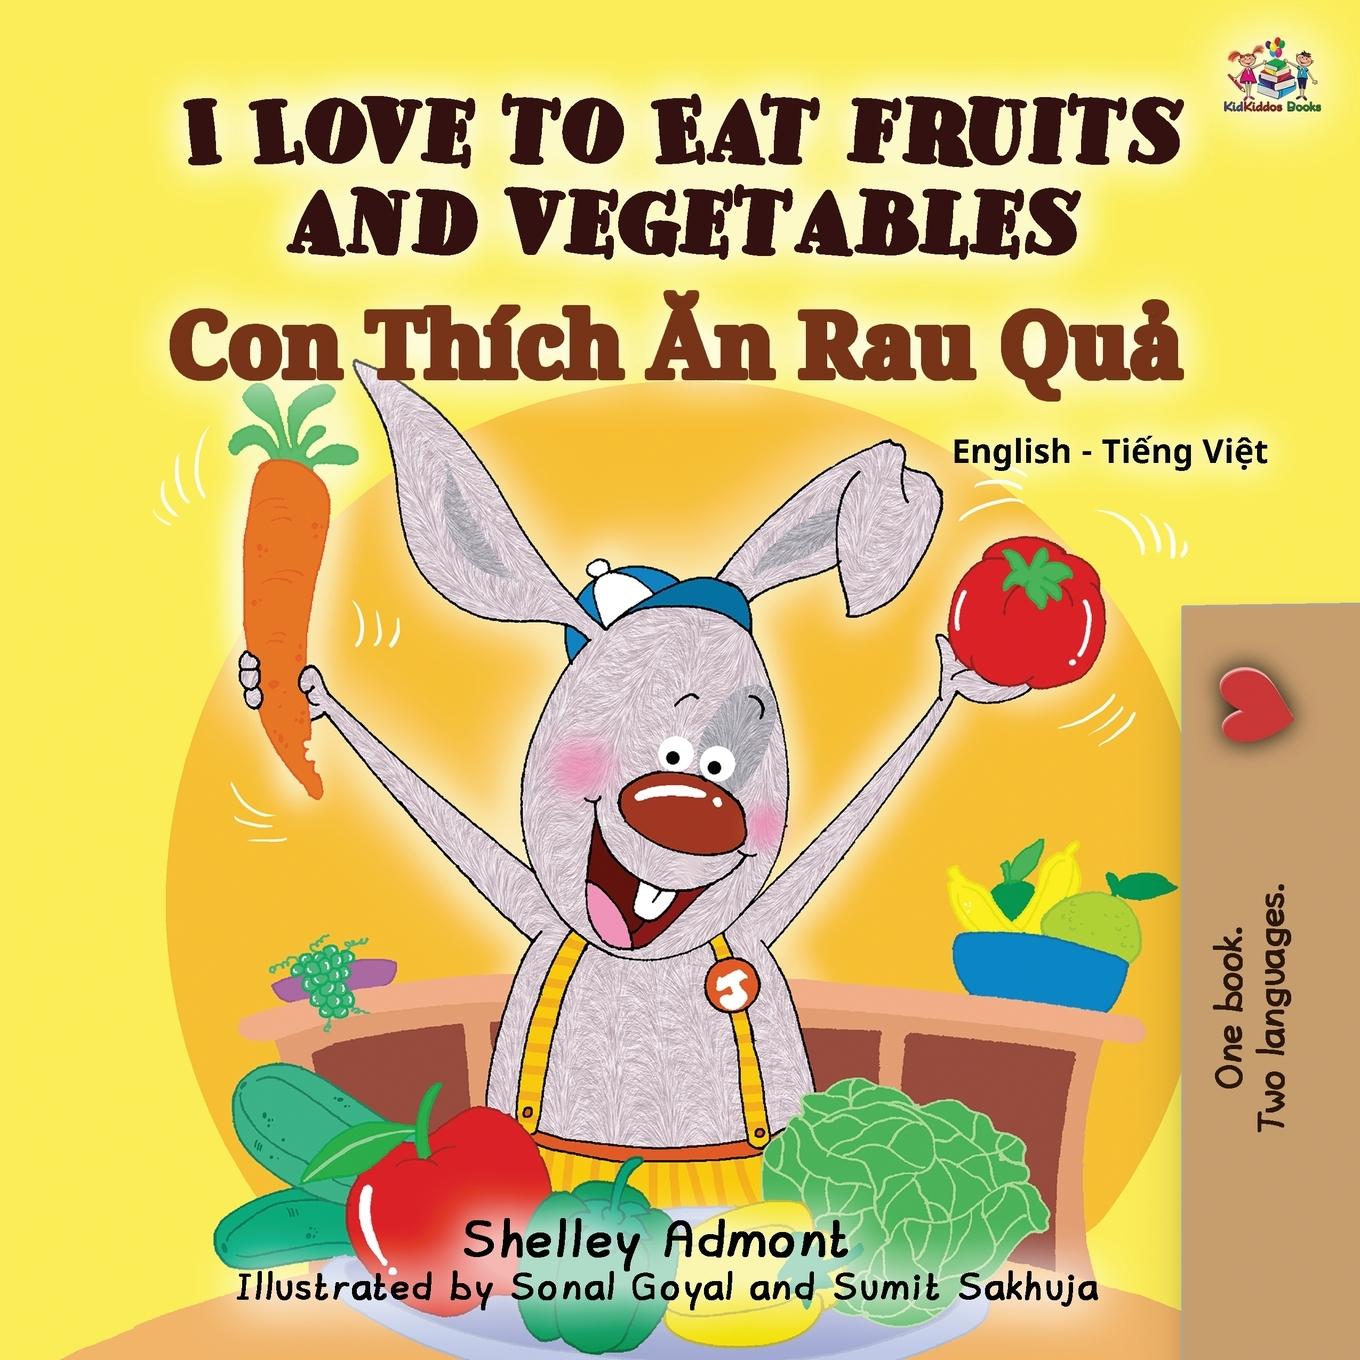 Könyv I Love to Eat Fruits and Vegetables (English Vietnamese Bilingual Book for Kids) Kidkiddos Books